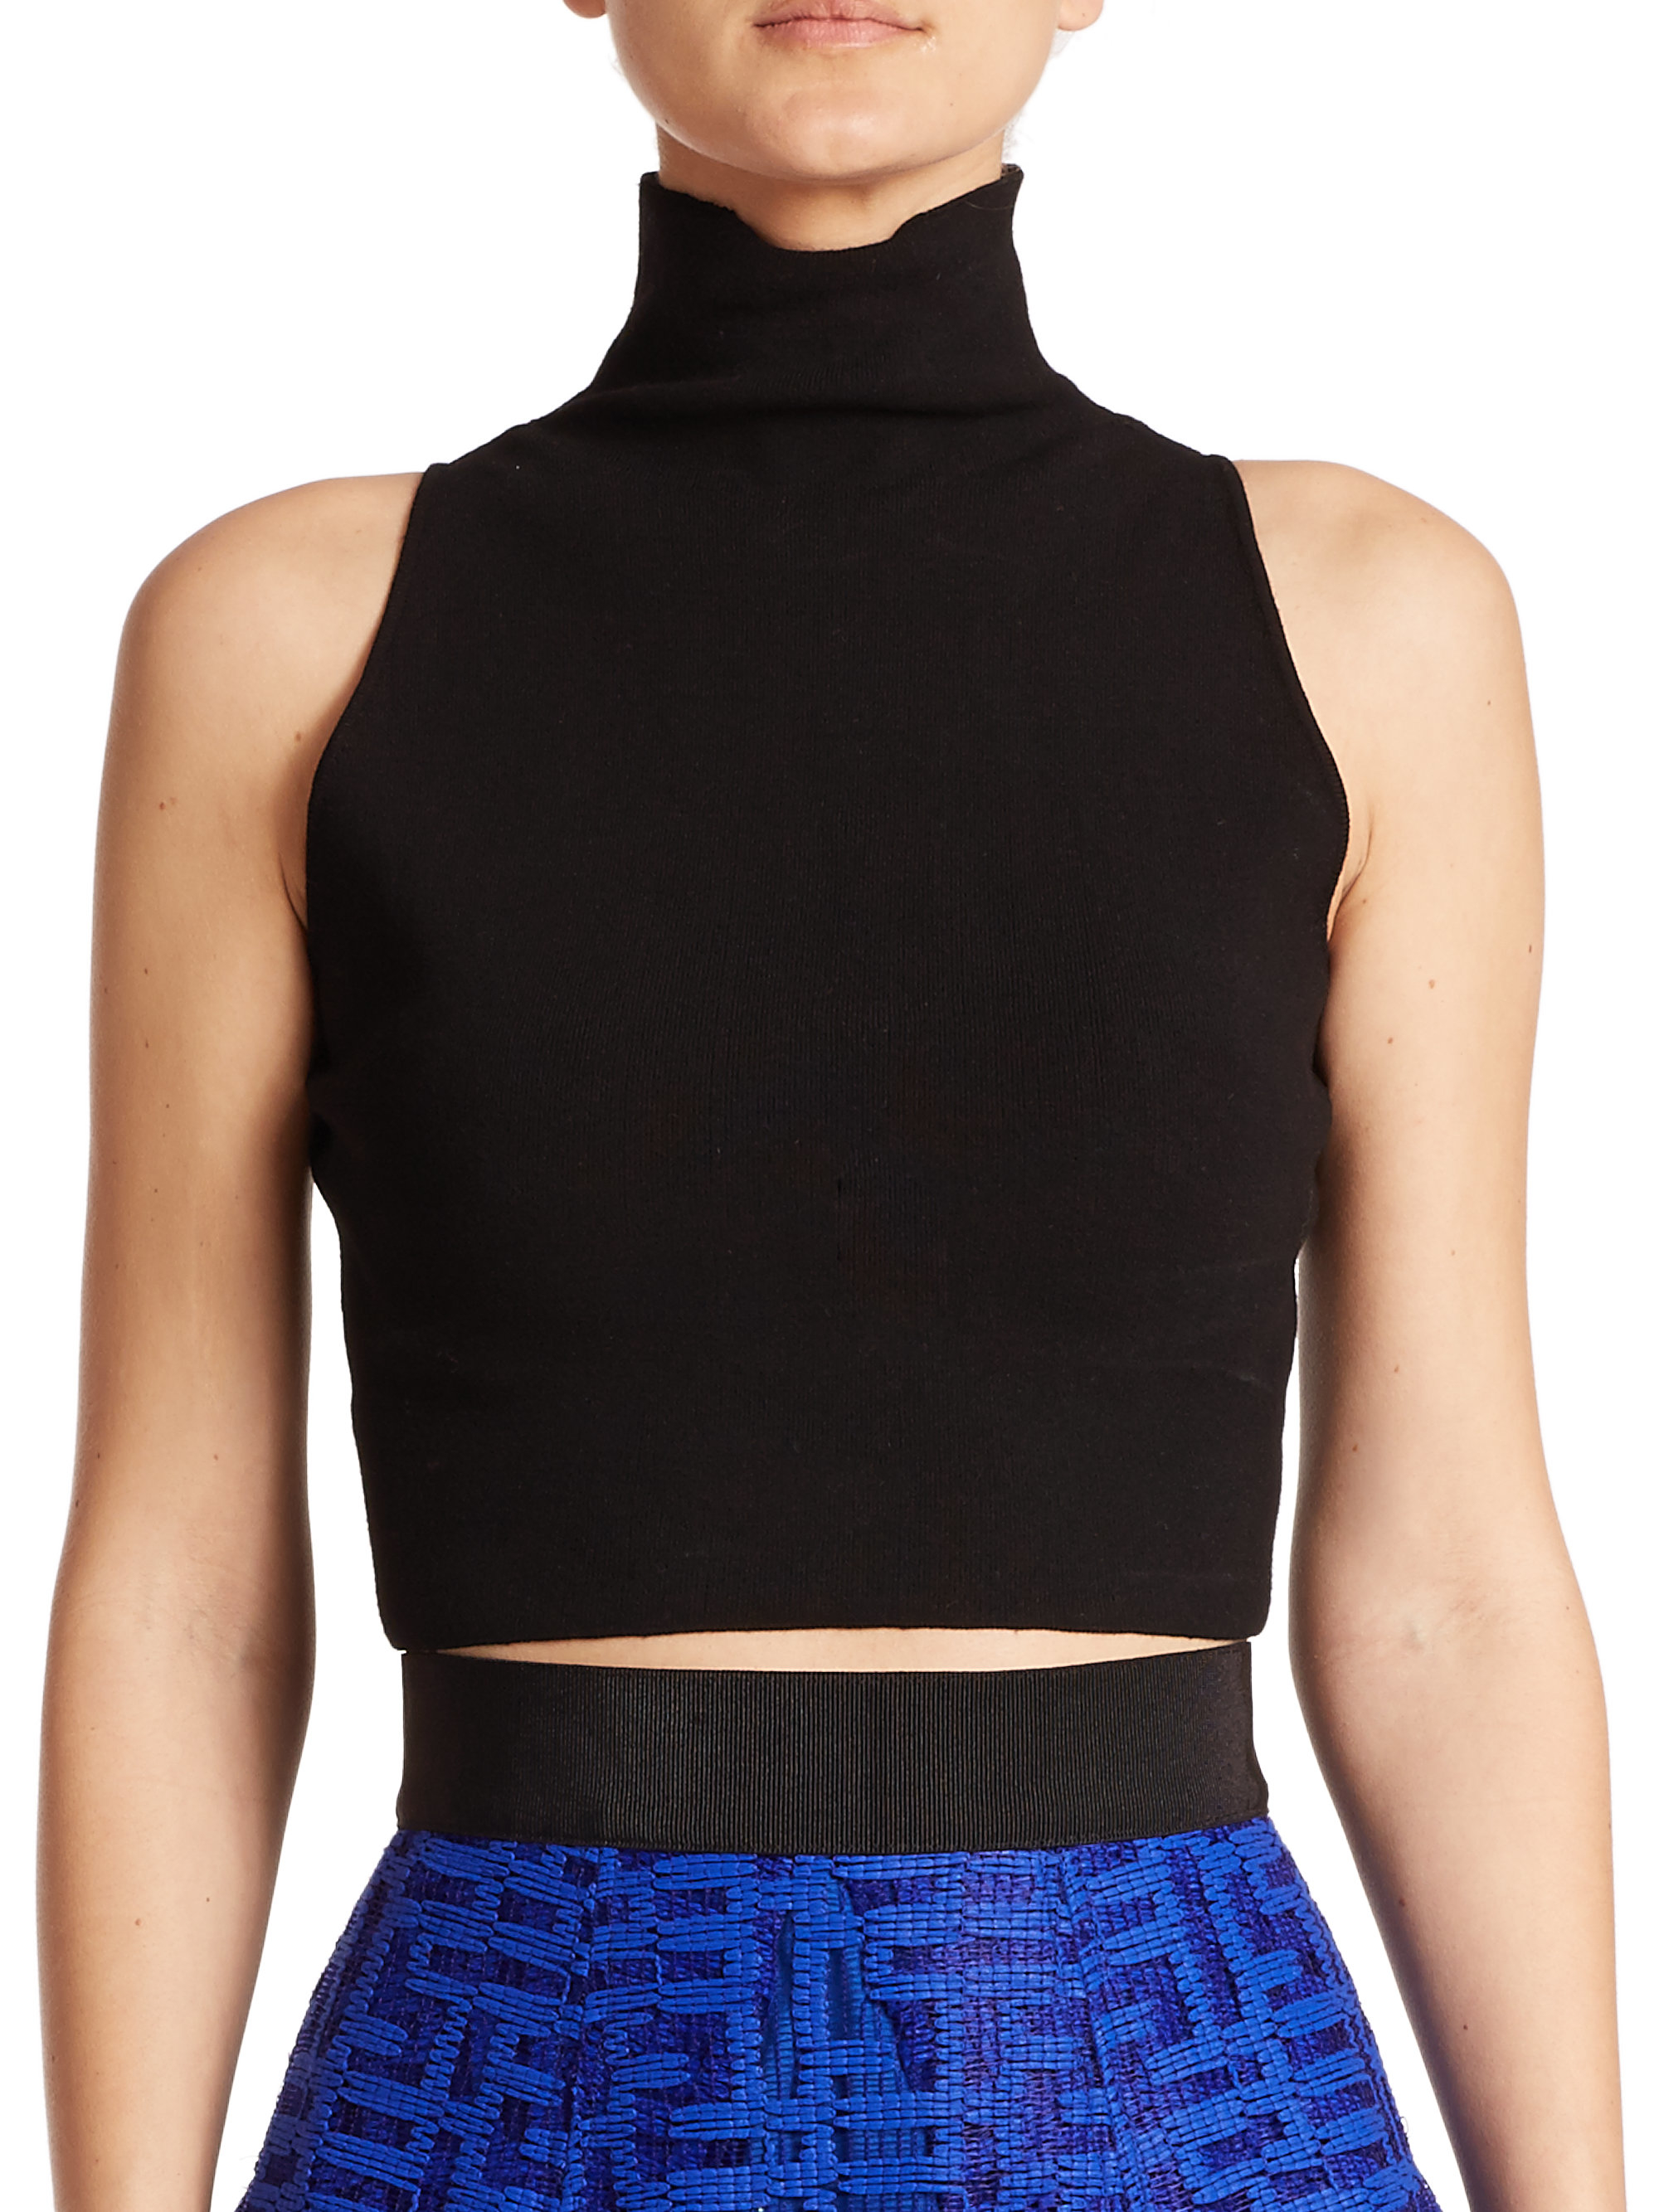 MILLY Sleeveless Turtleneck Cropped Top in Black - Lyst